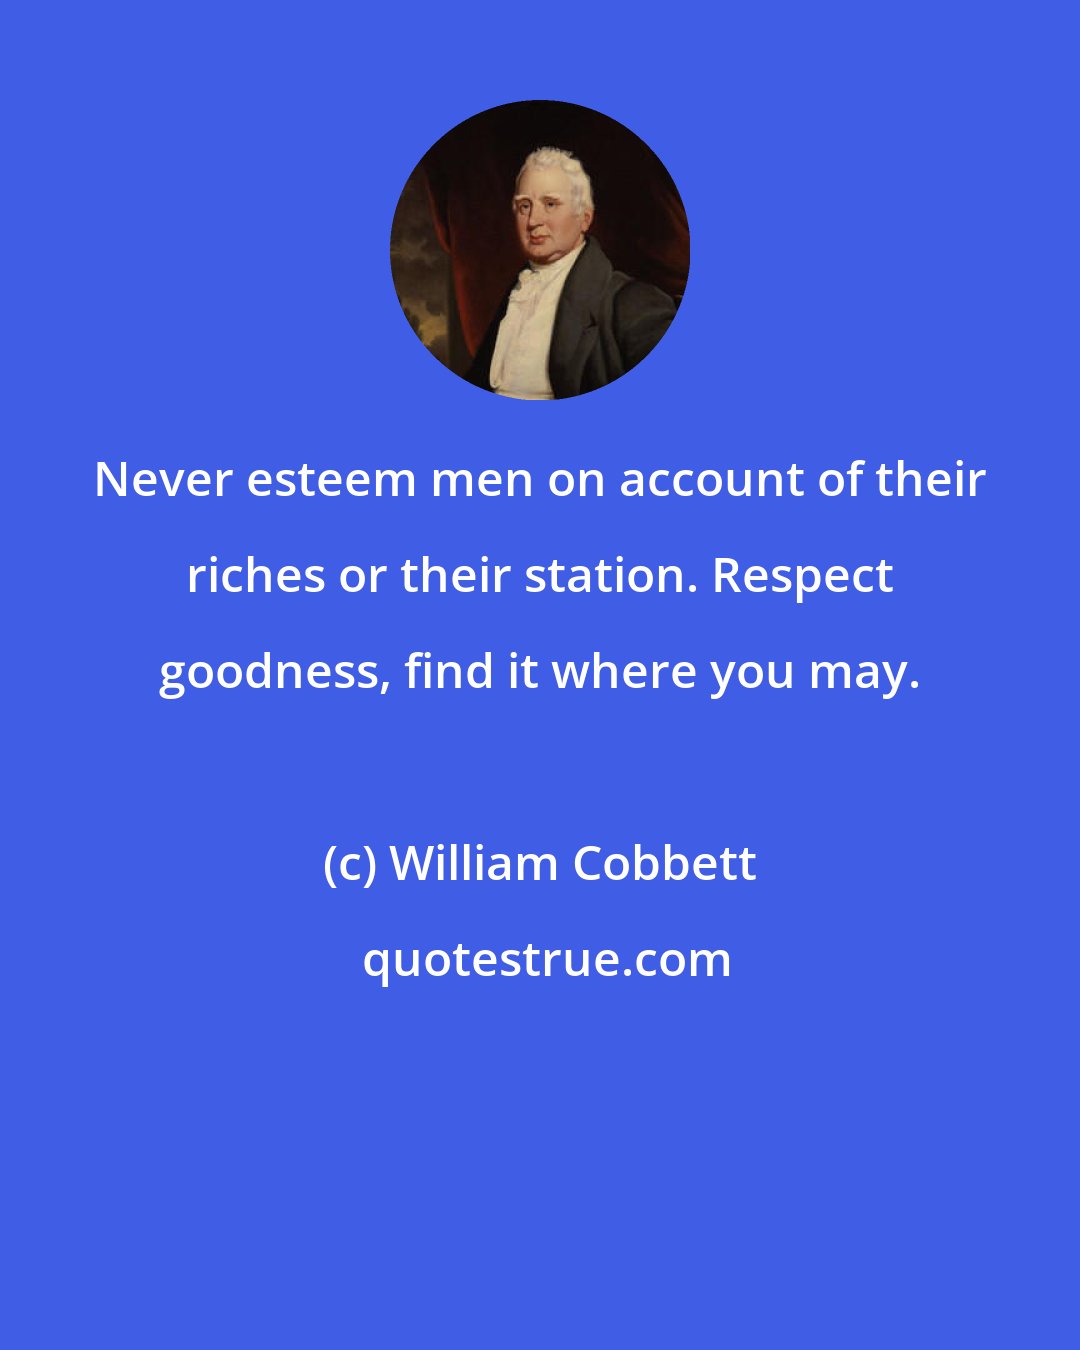 William Cobbett: Never esteem men on account of their riches or their station. Respect goodness, find it where you may.